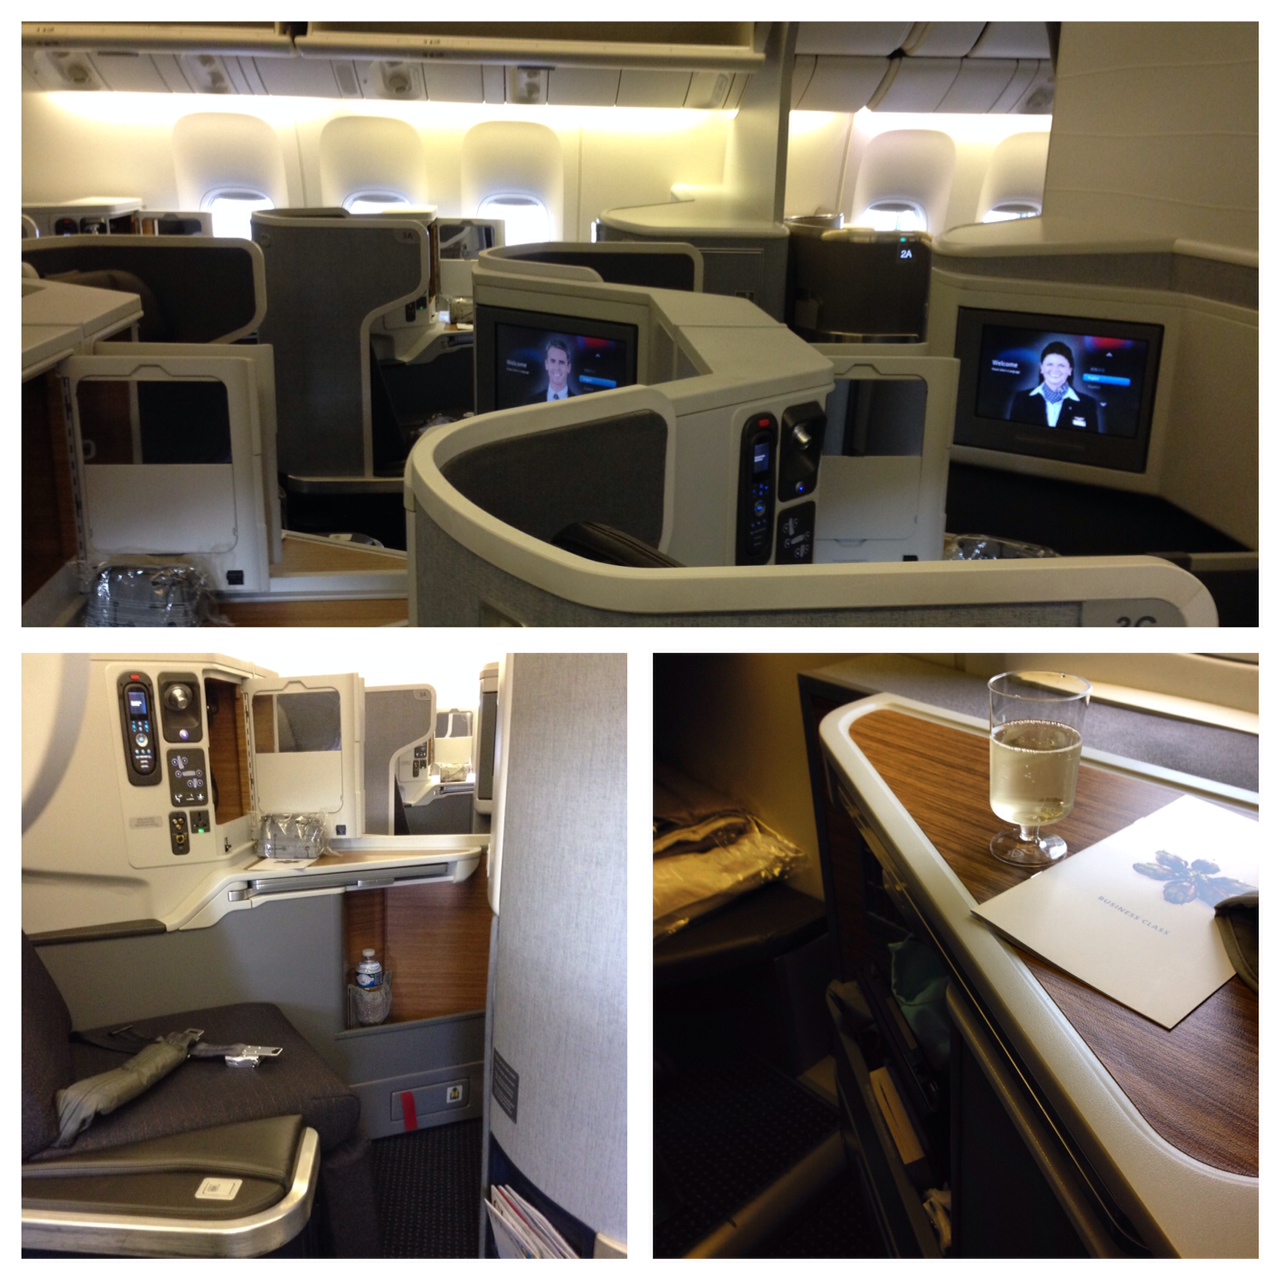 American Airlines Business Class – LHR to MIA